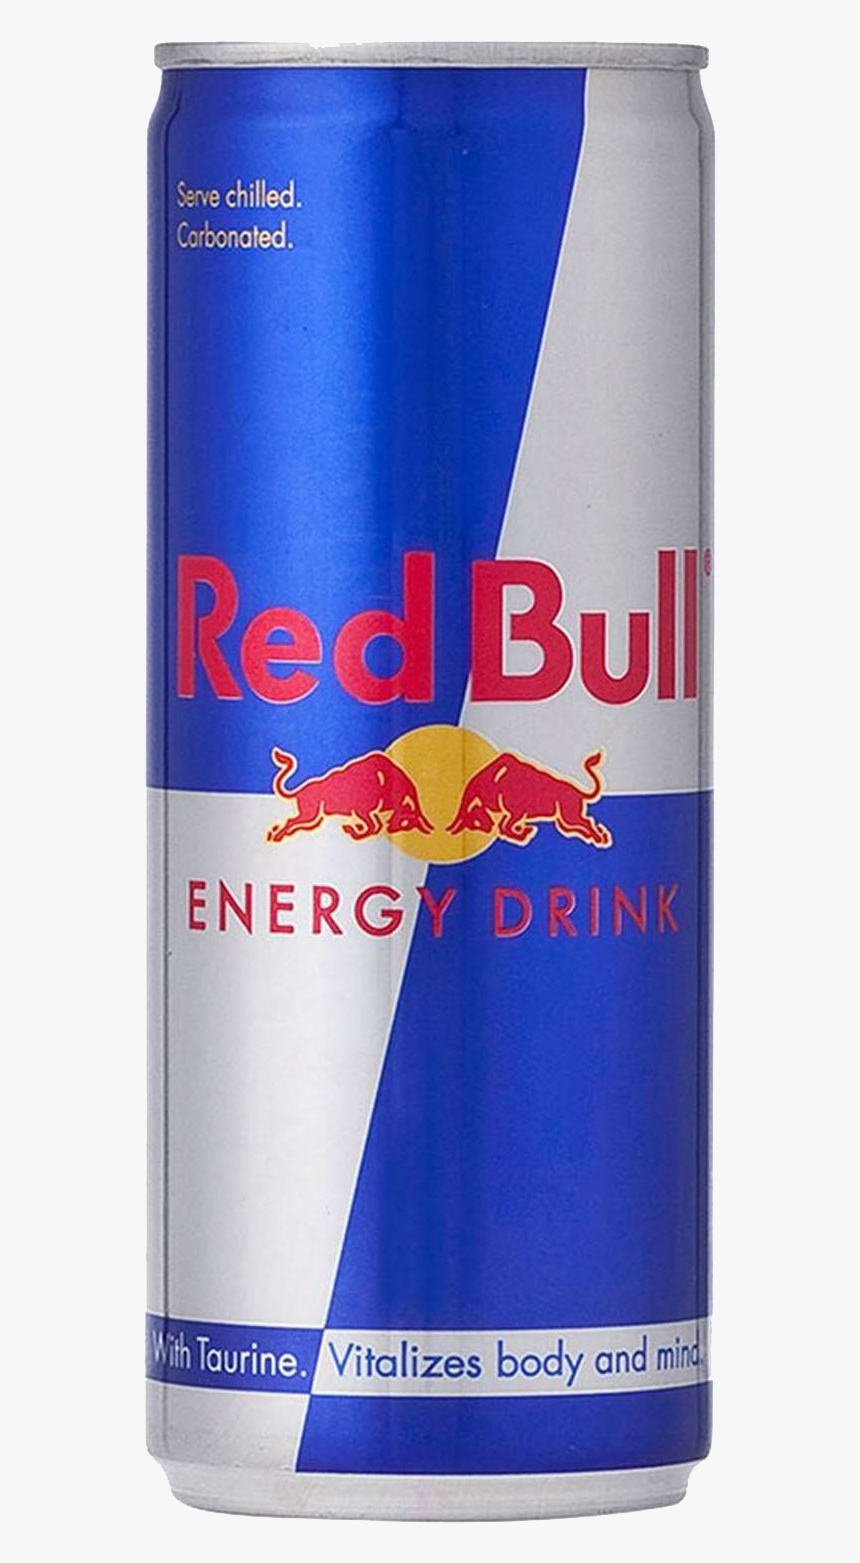 Red Bull Png Image Background - Red Bull Energy Drink Can, Transparent Png, Free Download